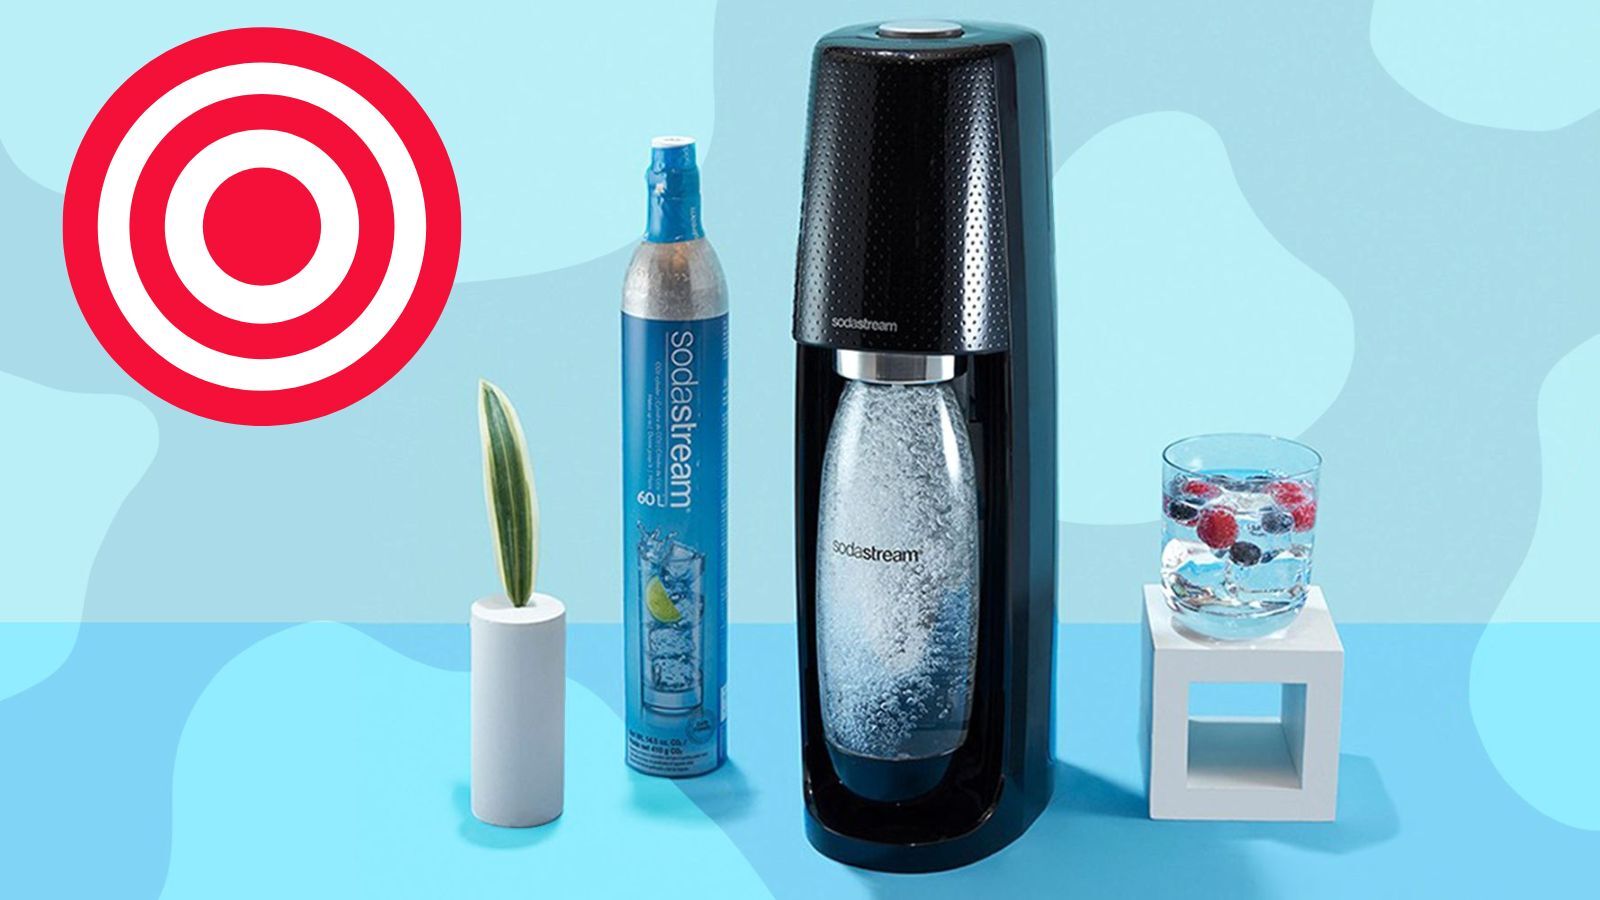 Where to get SodaStream refills and bottles: Target, Bed Bath